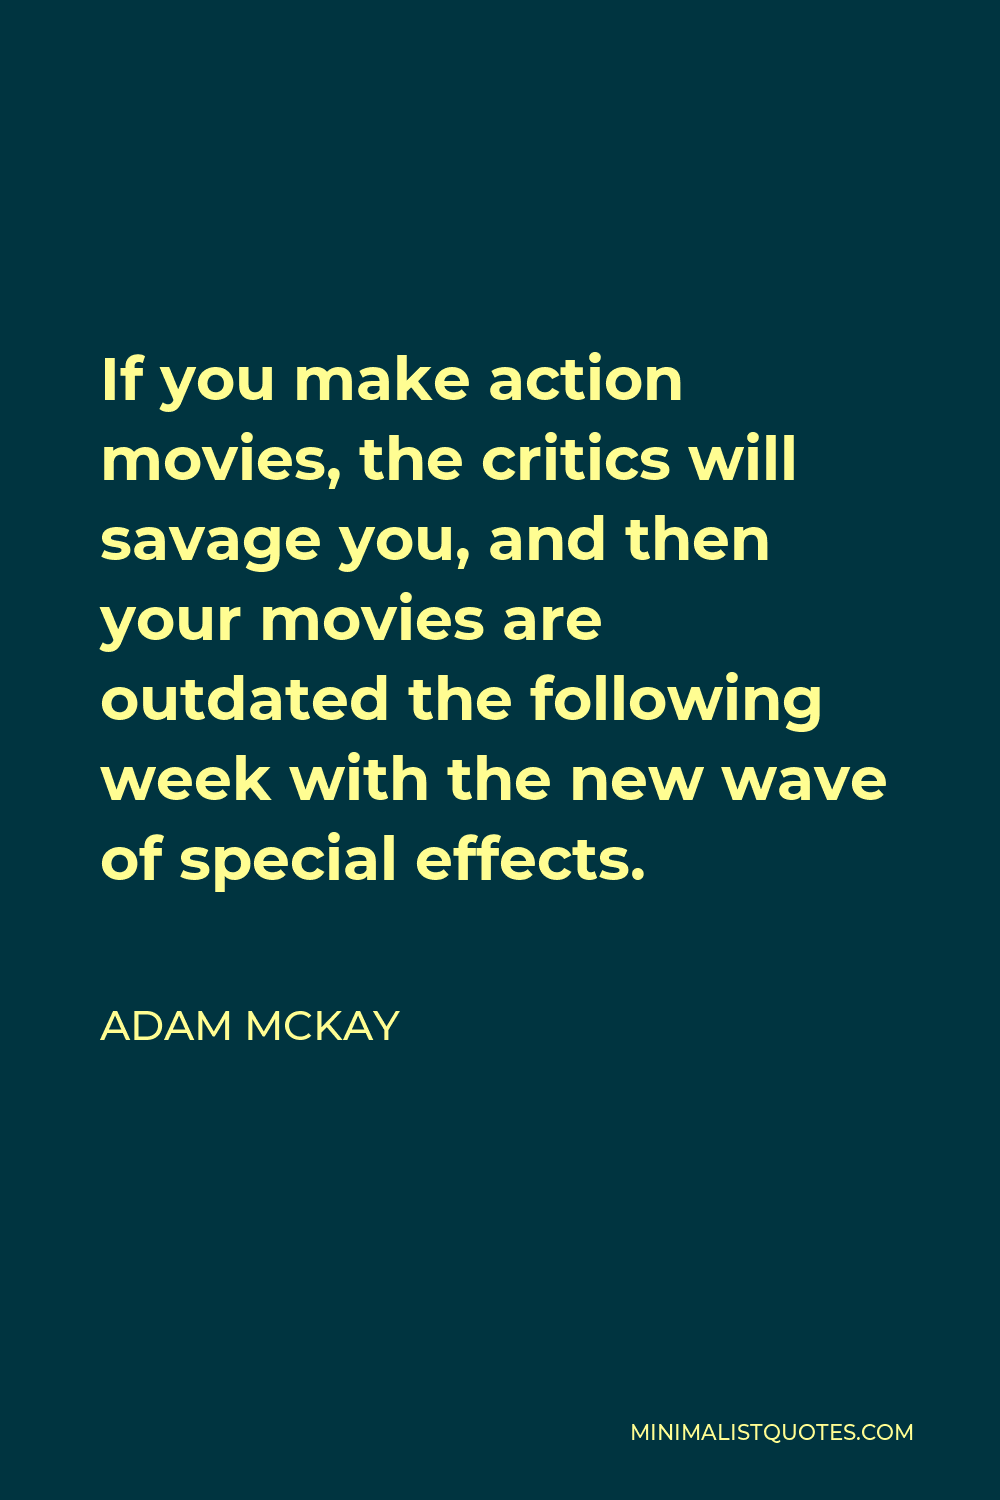 Adam McKay Quote - If you make action movies, the critics will savage you, and then your movies are outdated the following week with the new wave of special effects.